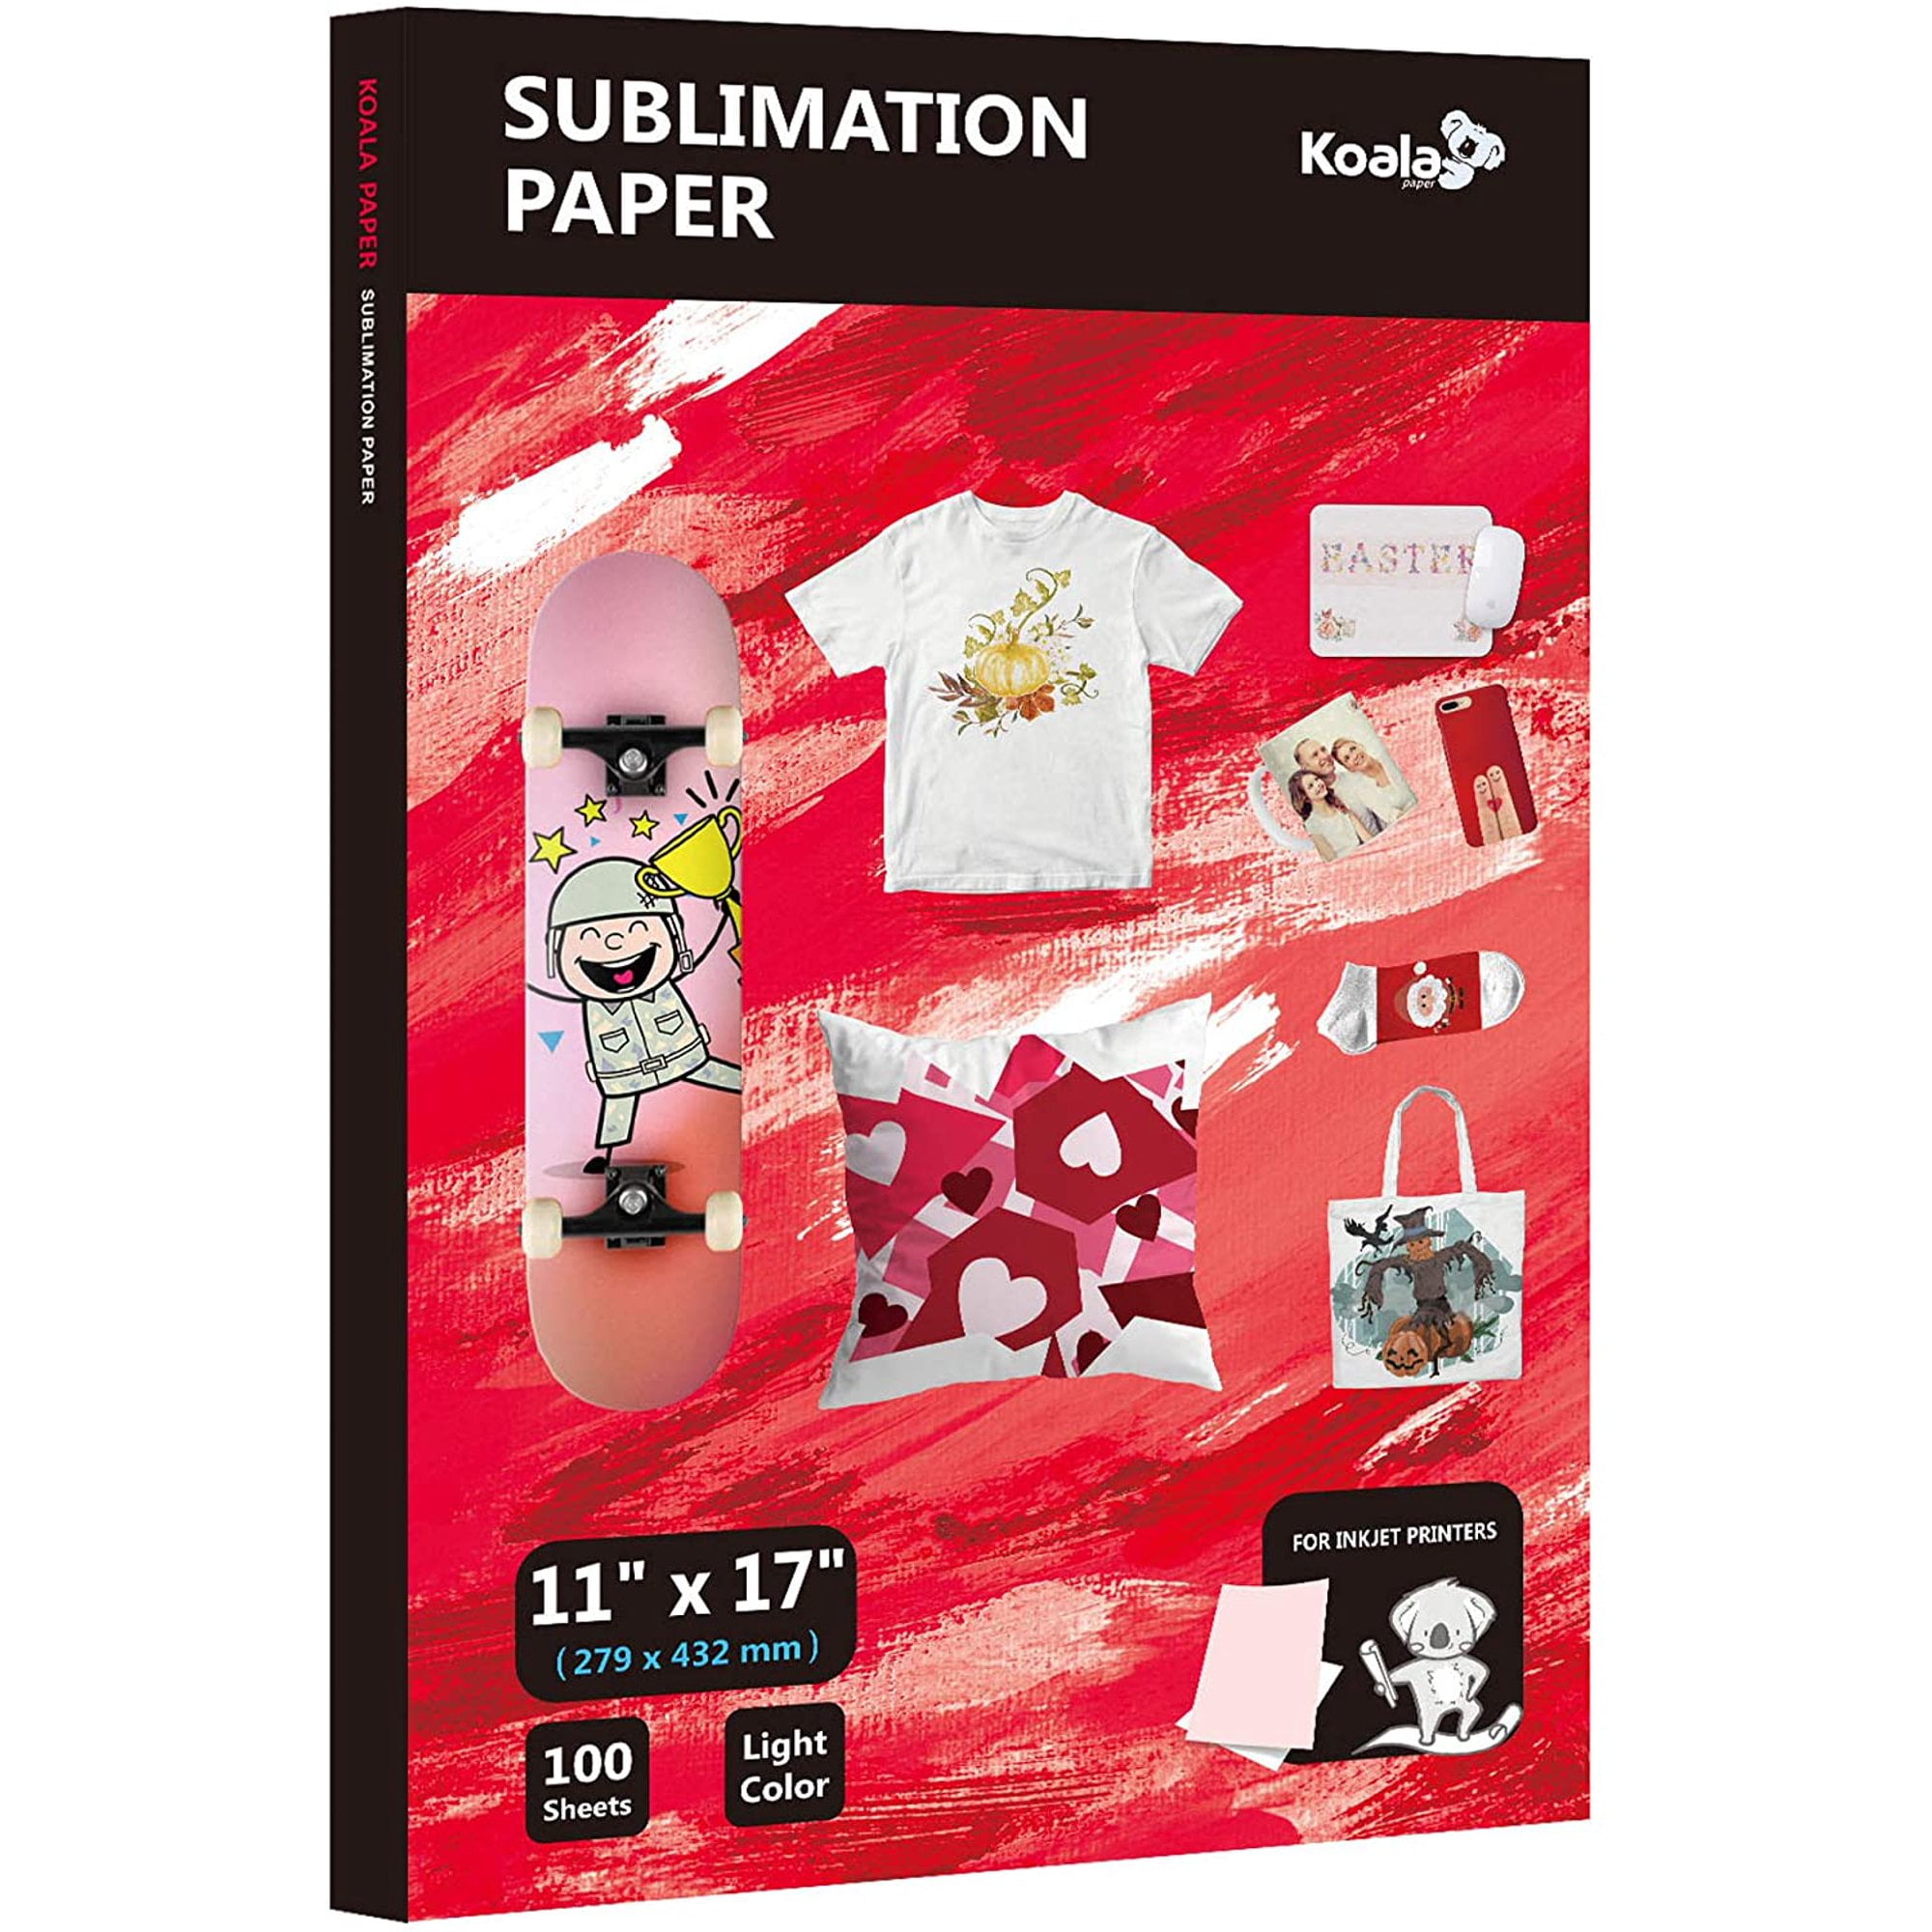 Koala Sublimation Heat Transfer Paper 8.5x11 Inch for Inkjet Printer Compatible with Sublimation Ink 100 Sheets 123gsm